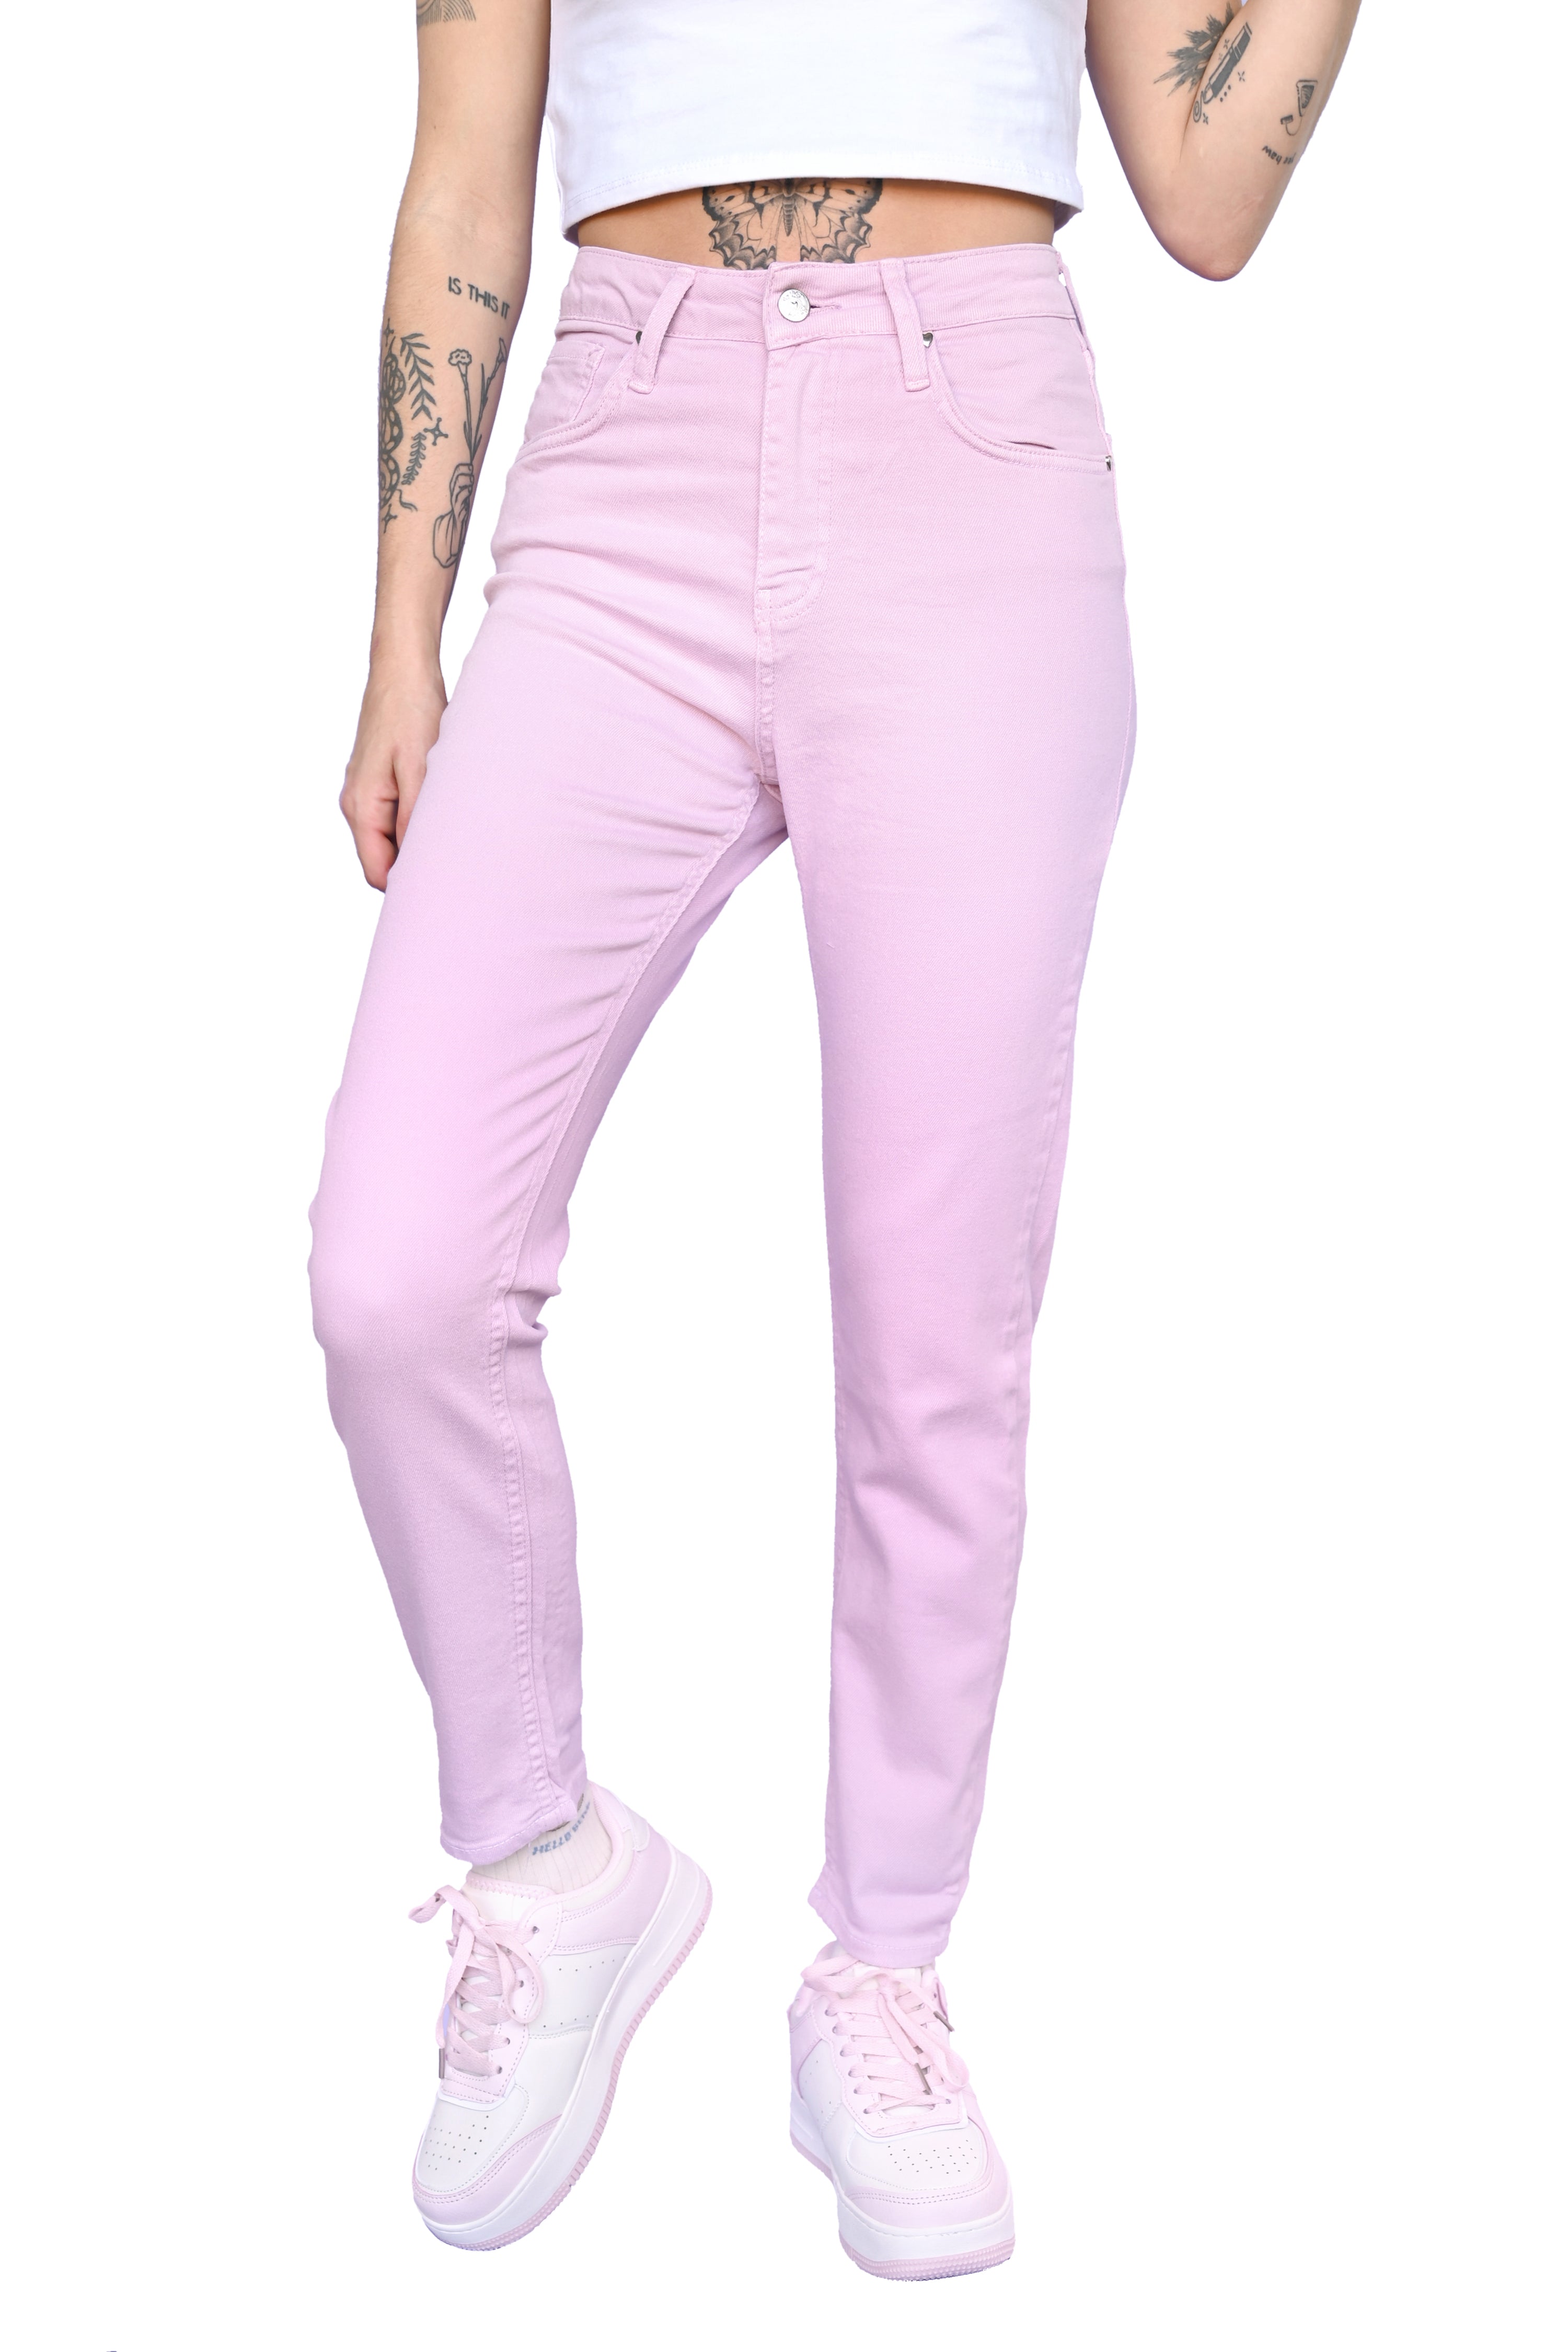 A pair of lilac relax fit skinny jeans with a high waist and 5 pockets